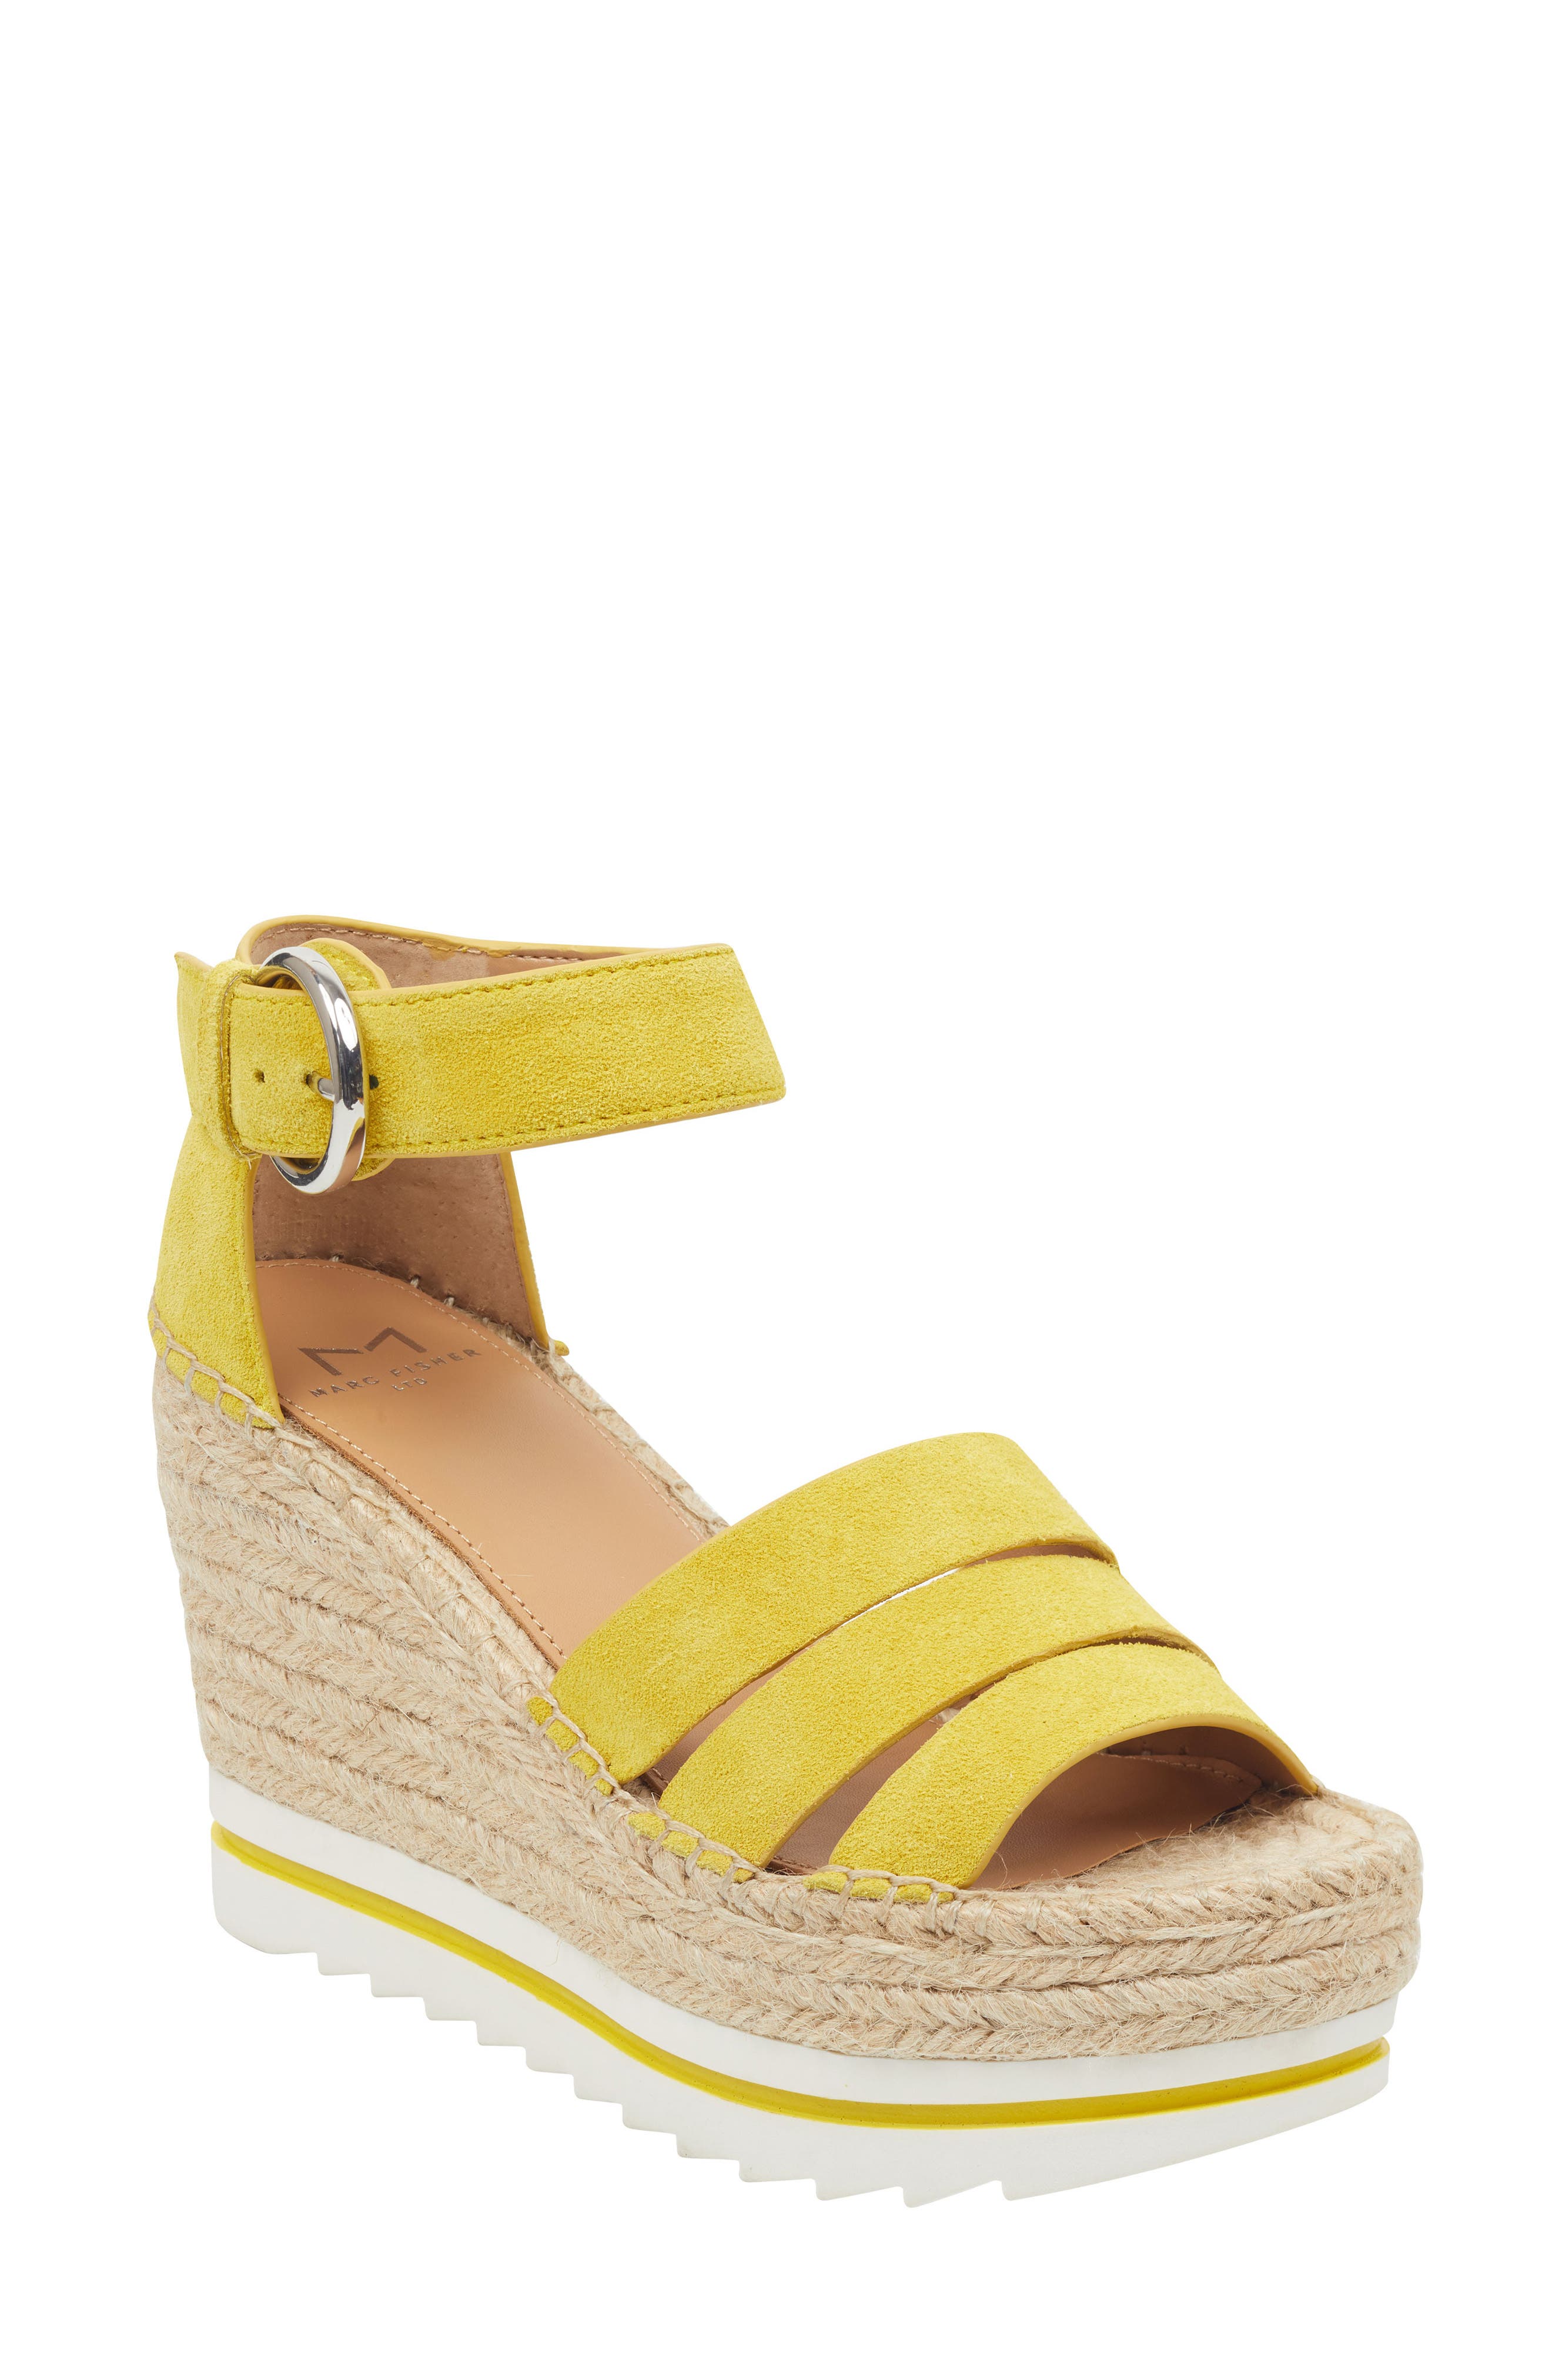 marc fisher yellow wedges